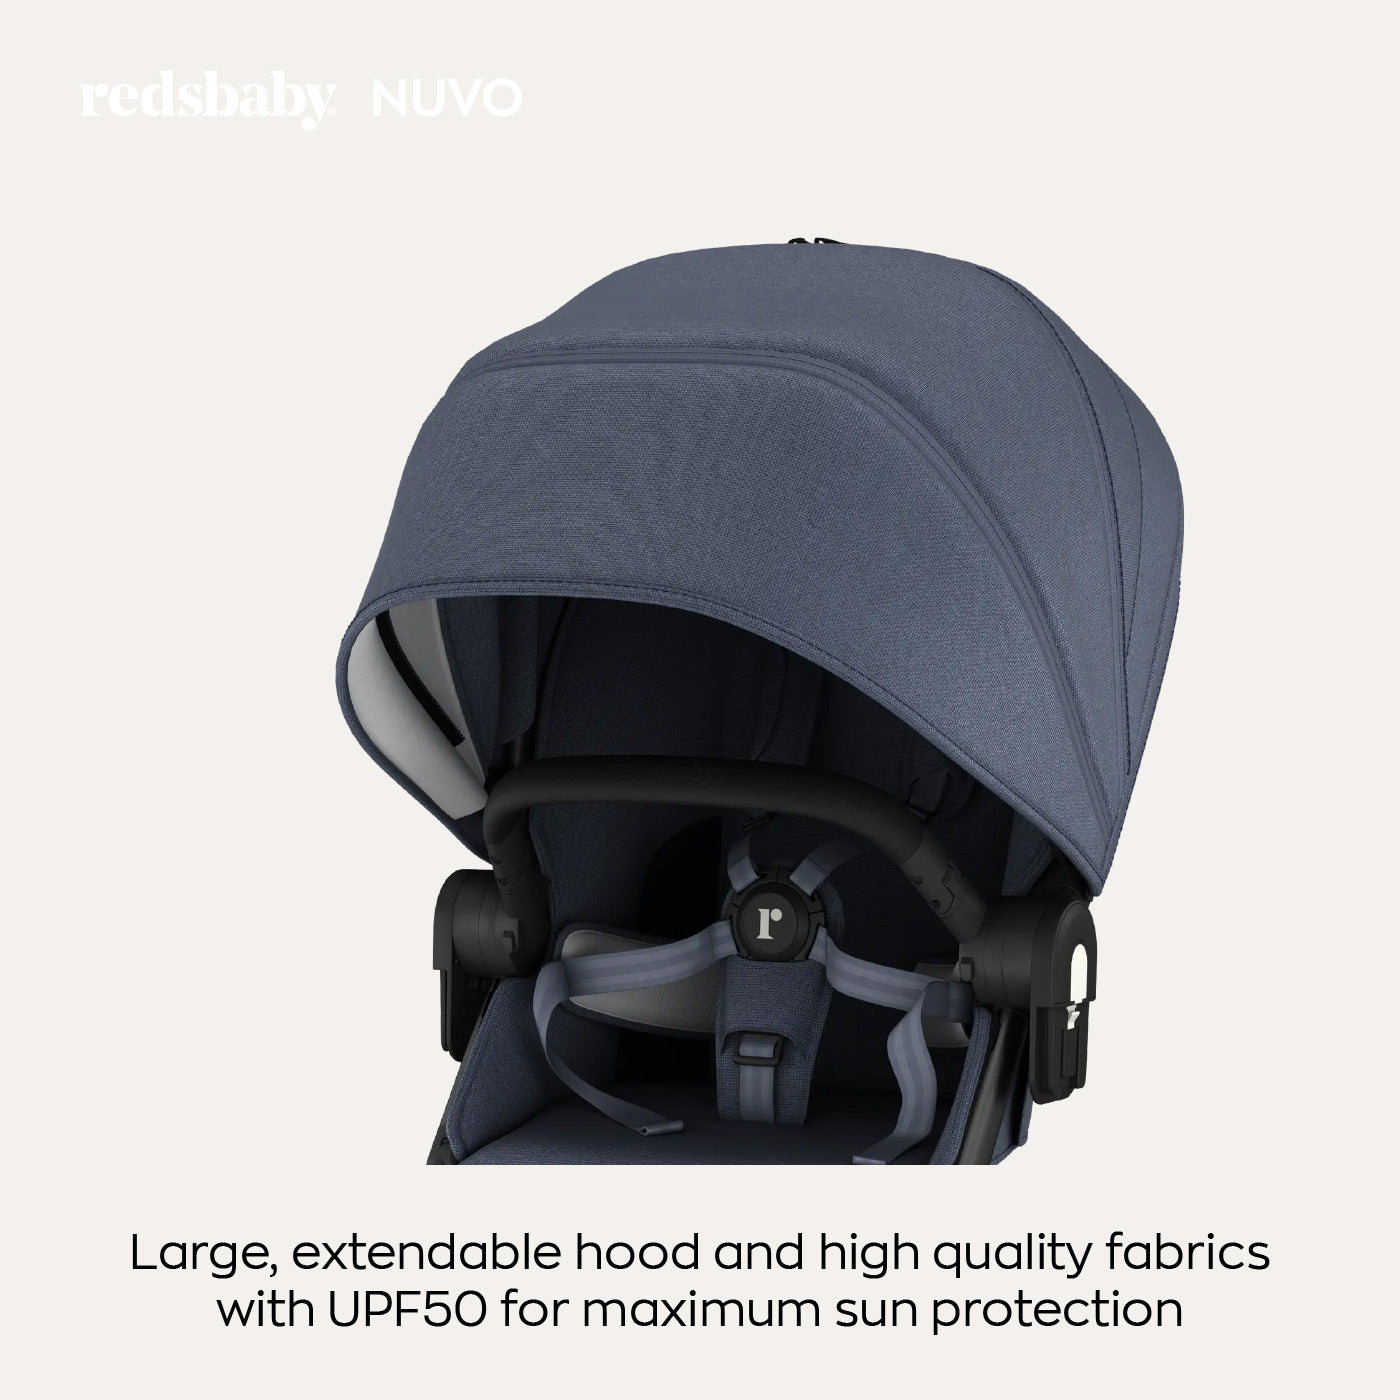 Close-up image focusing on the canopy of a navy blue stroller with the text "reds baby NUVO. Large, extendable hood and high quality fabrics with UPF50 for maximum sun protection." The hood is extended to show its size and texture.